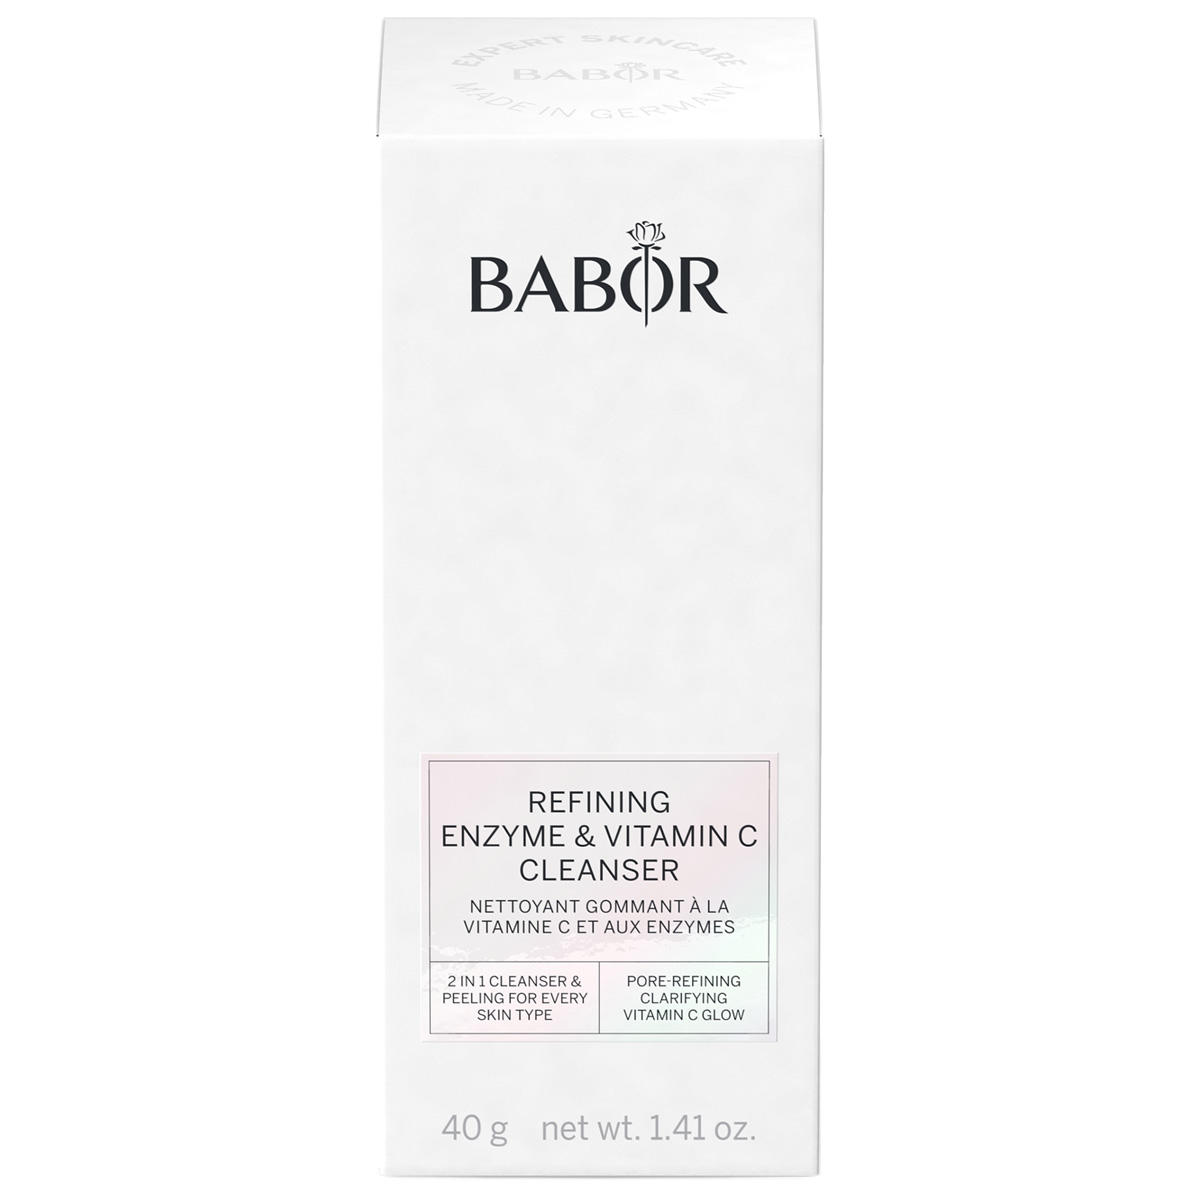 BABOR CLEANSING Refining Enzyme & Vitamin C Cleanser 40 g - 2